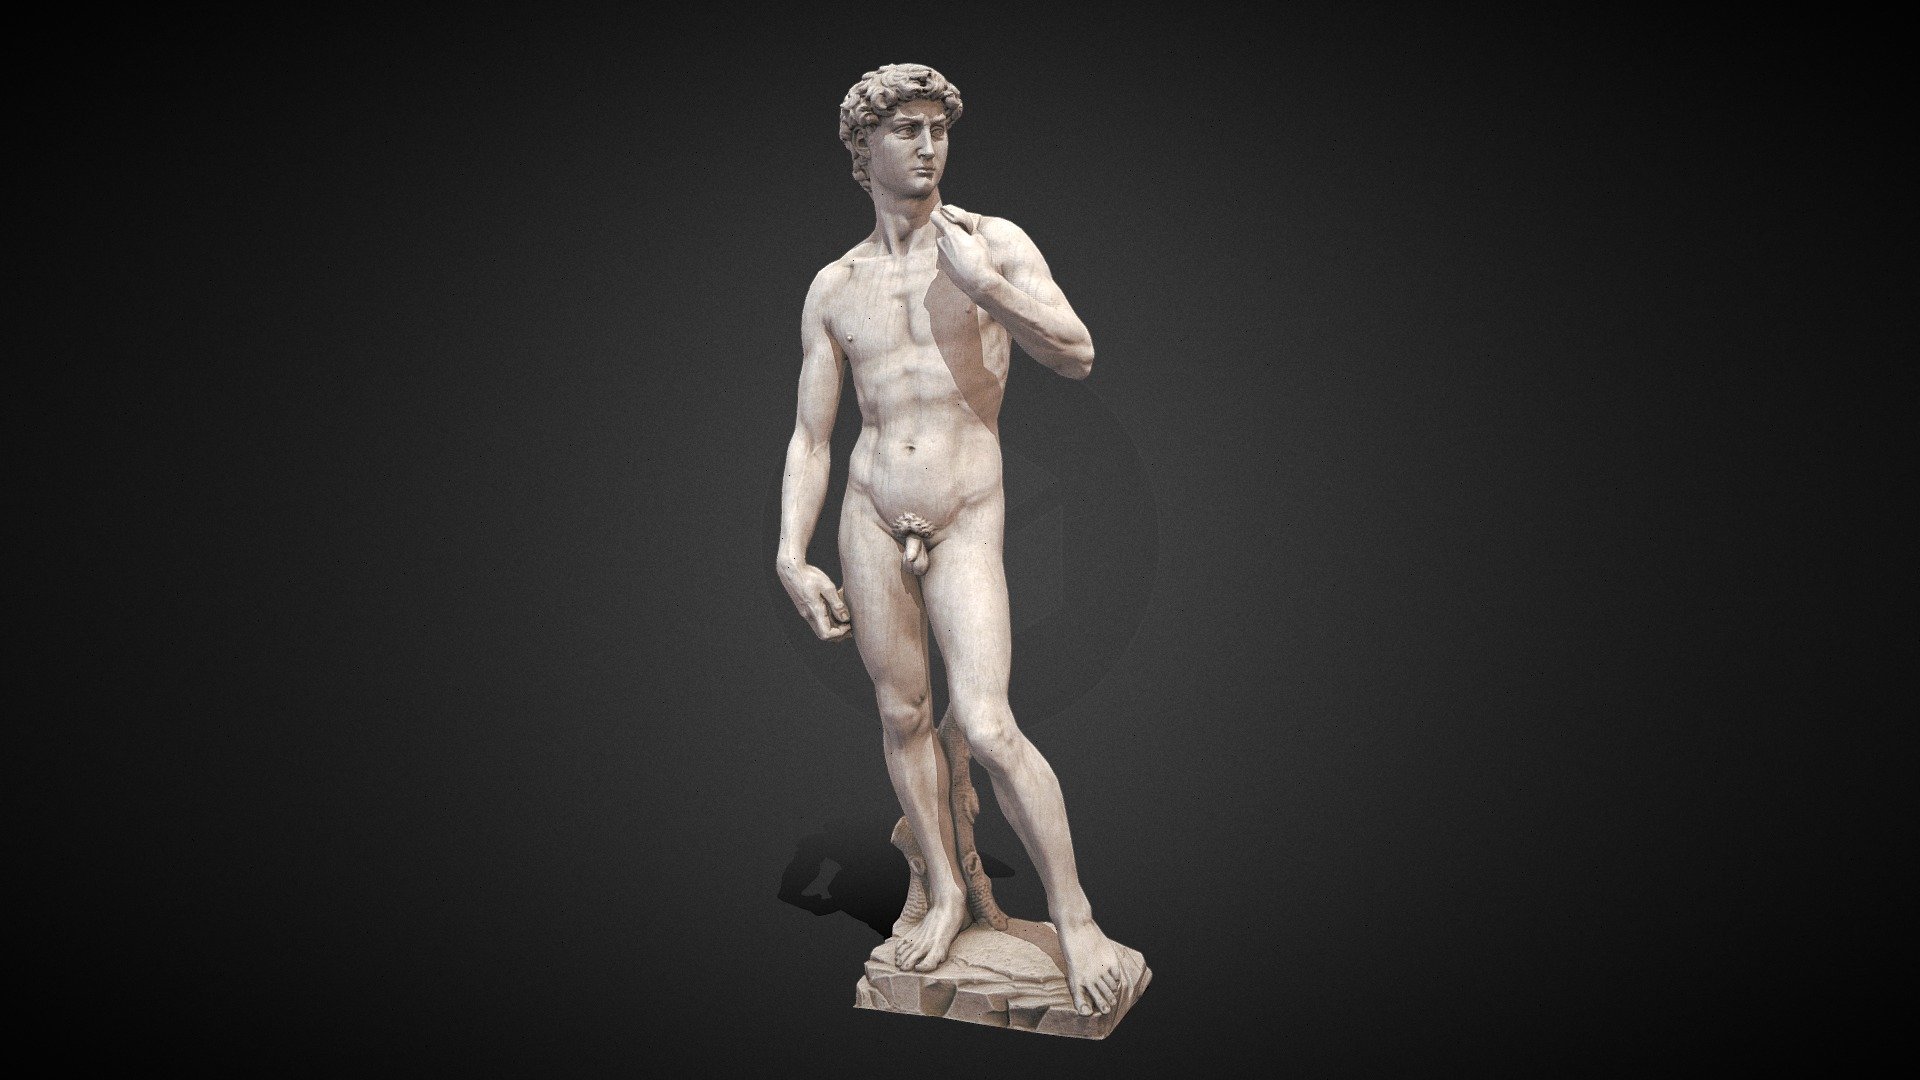 Michelangelo's David statue 3D model for real-time engines. The model is made on the basis of a photo and a photogrammetry software data.

Contains following textures:
Albedo, Normal, Ambient Occlusion, Roughness, Metallic - Michelangelo's David statue - 3D model by wasco 3d model